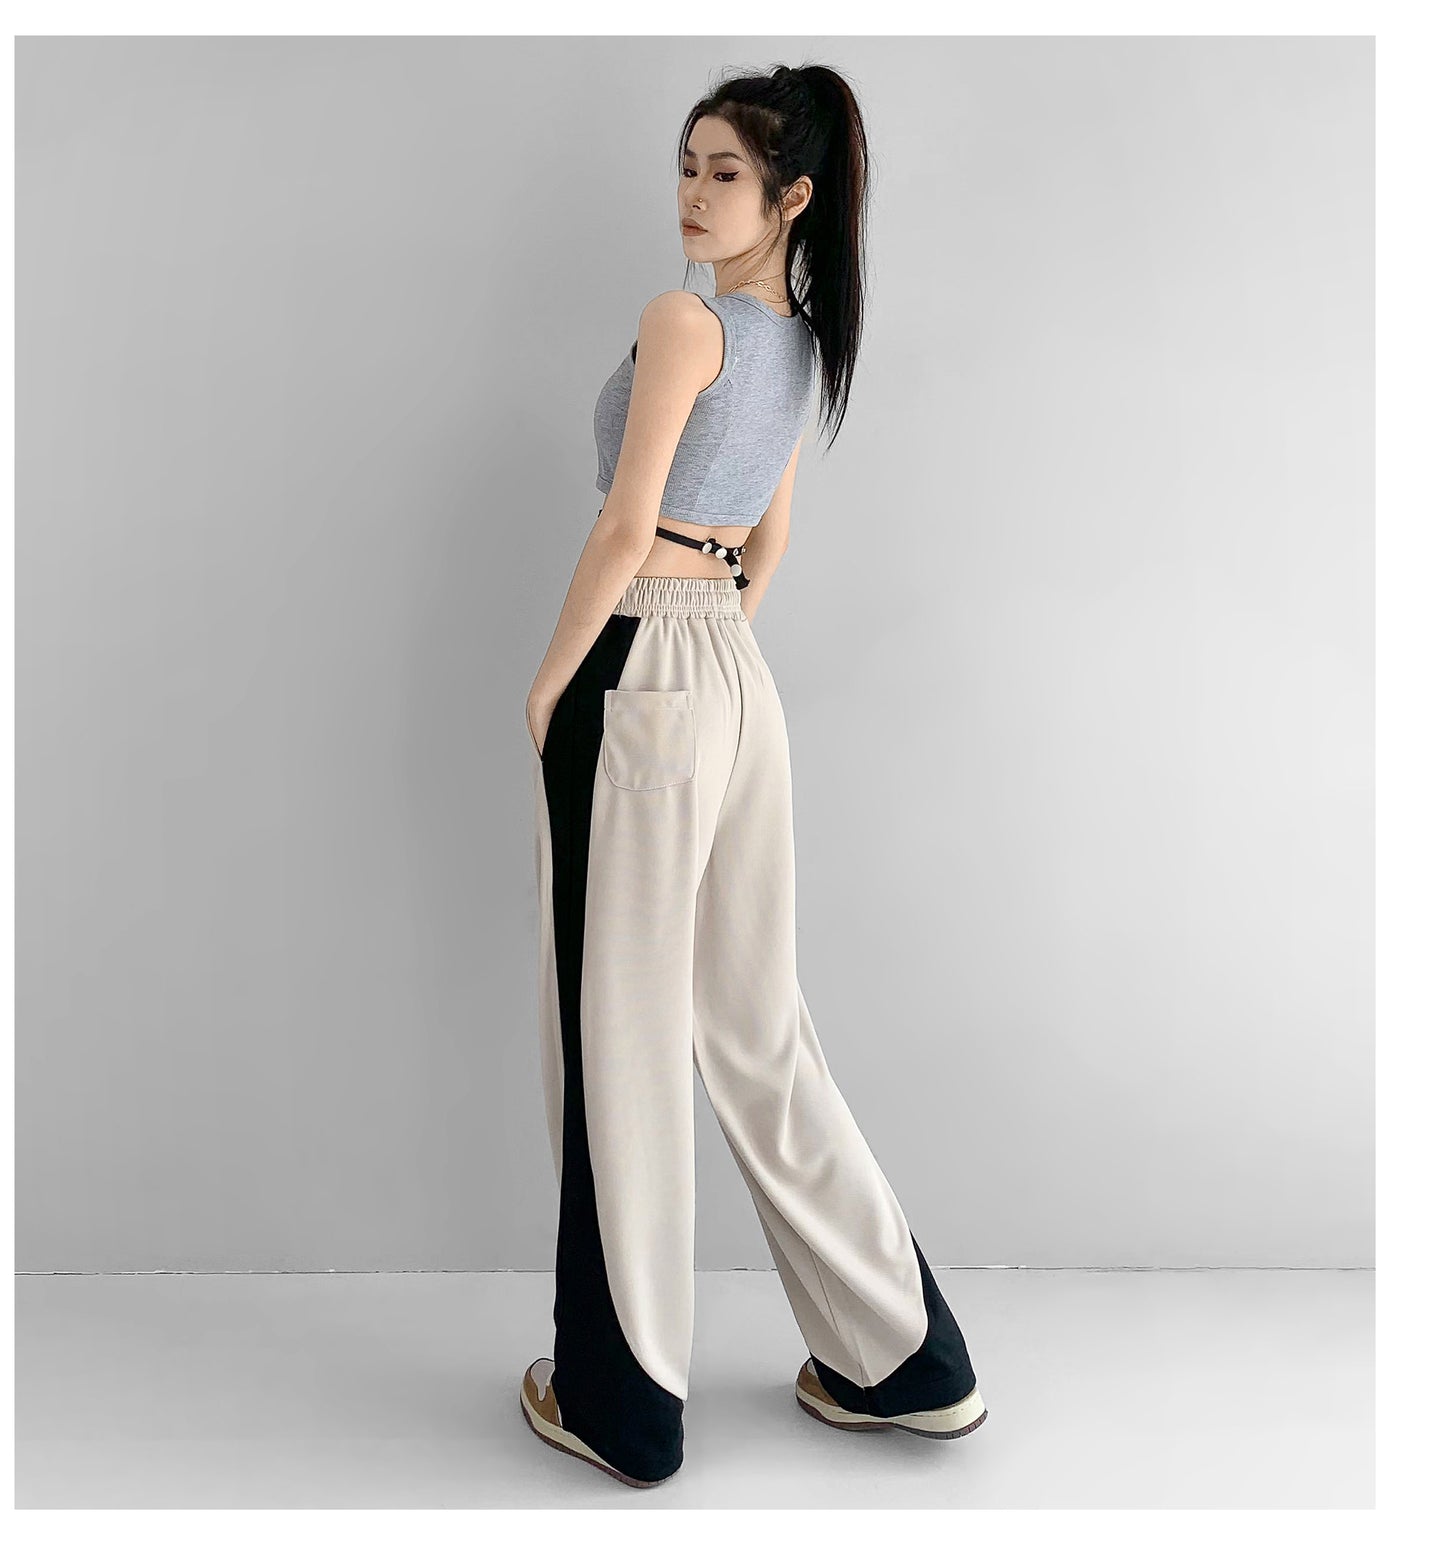 
                  
                    Loose Fitting Fashionable Sports Pants For Women
                  
                